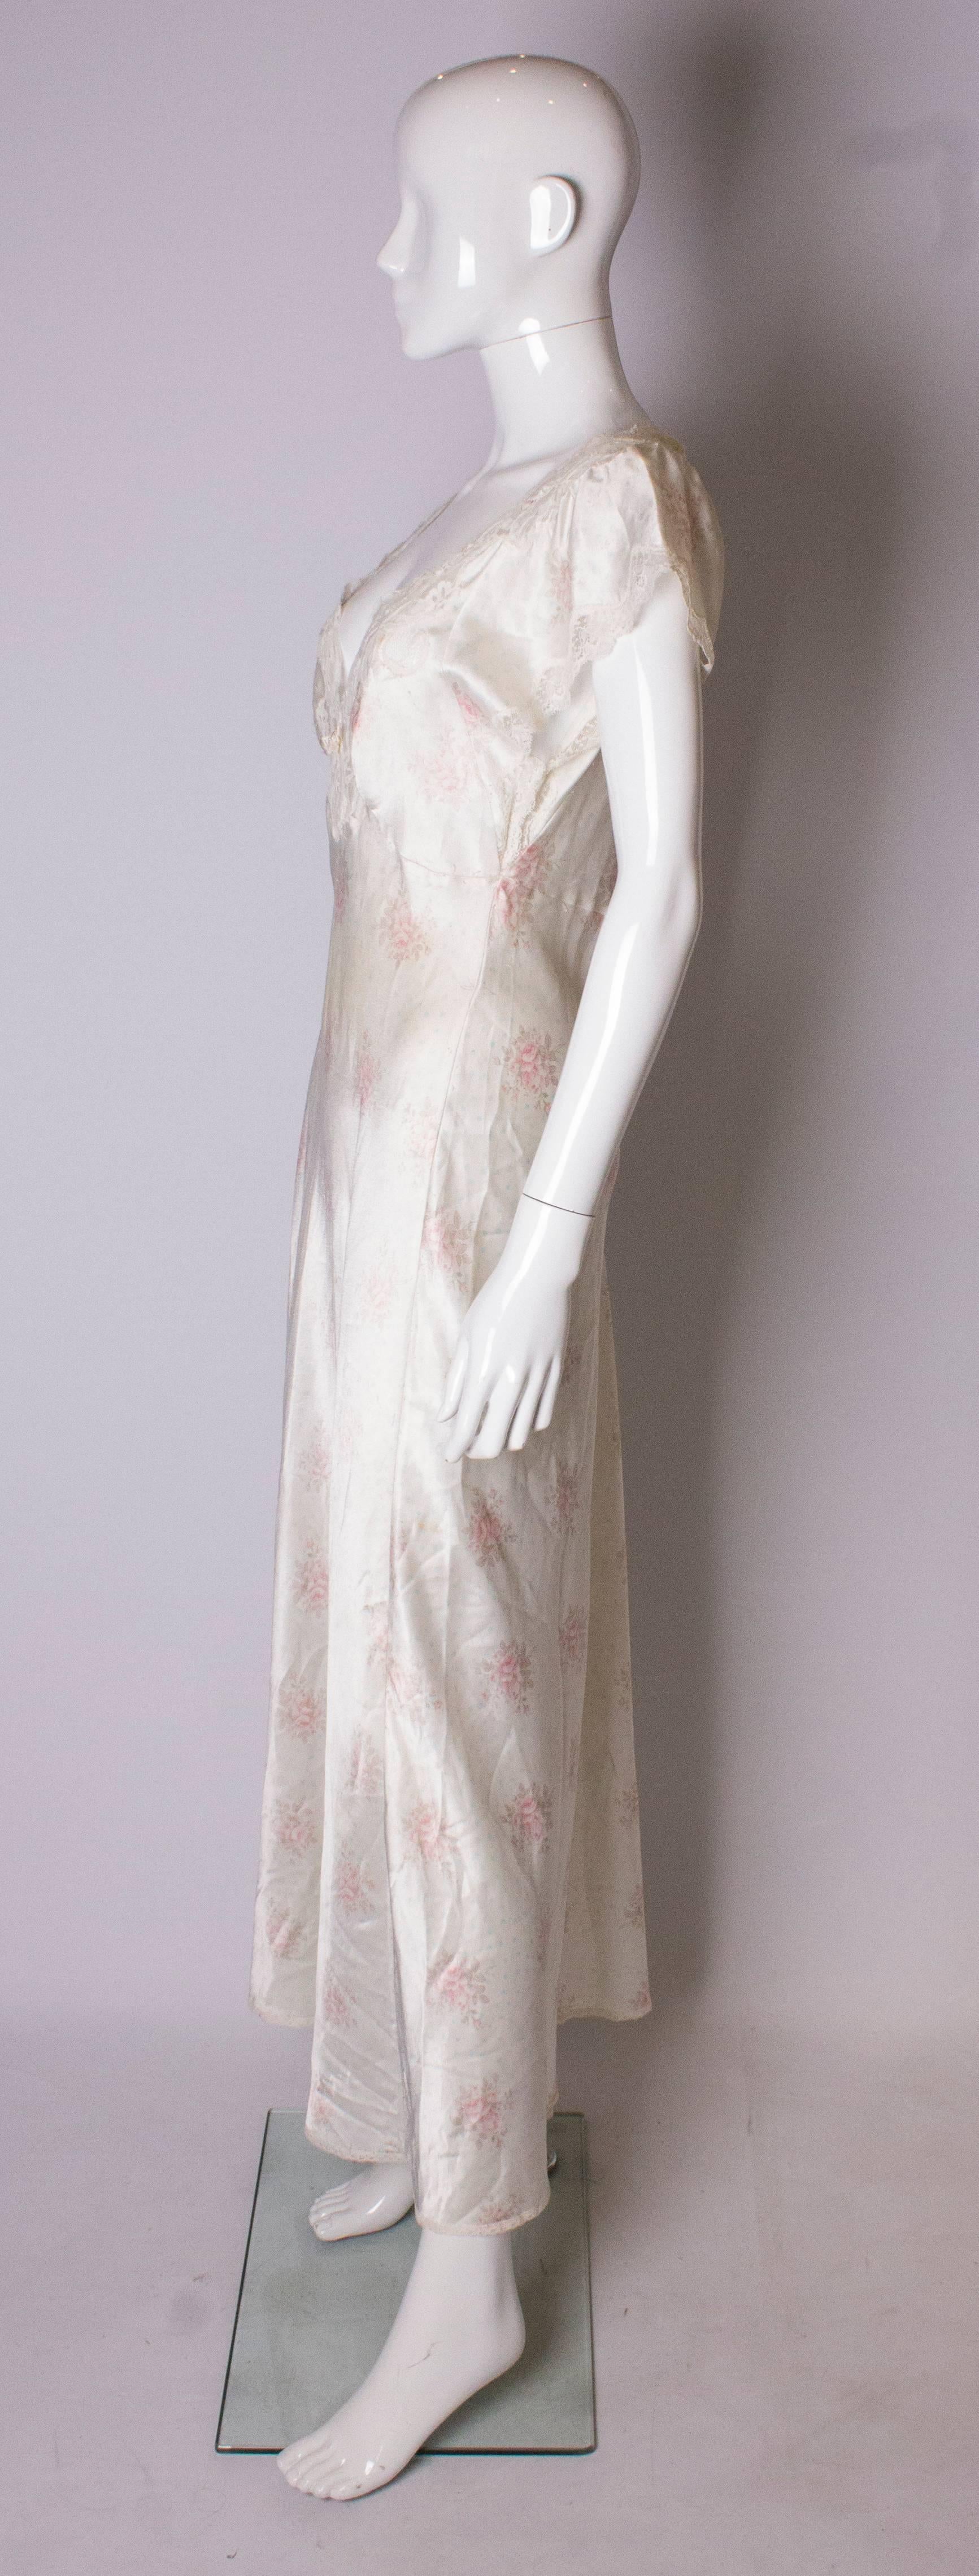 christian dior vintage nightgown